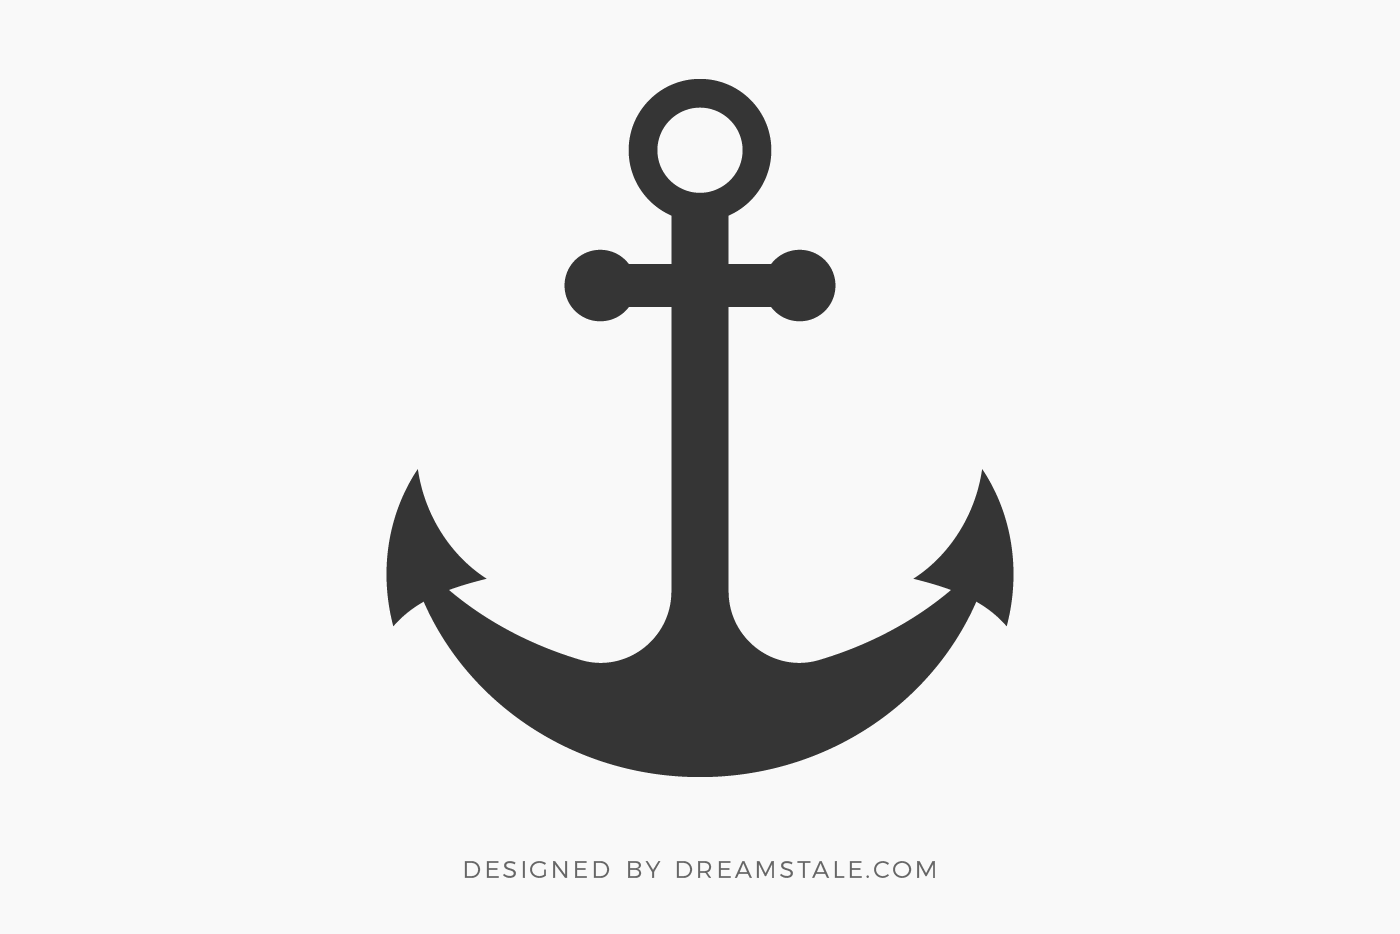 Download Nautical Anchor Free SVG Clipart - Dreamstale